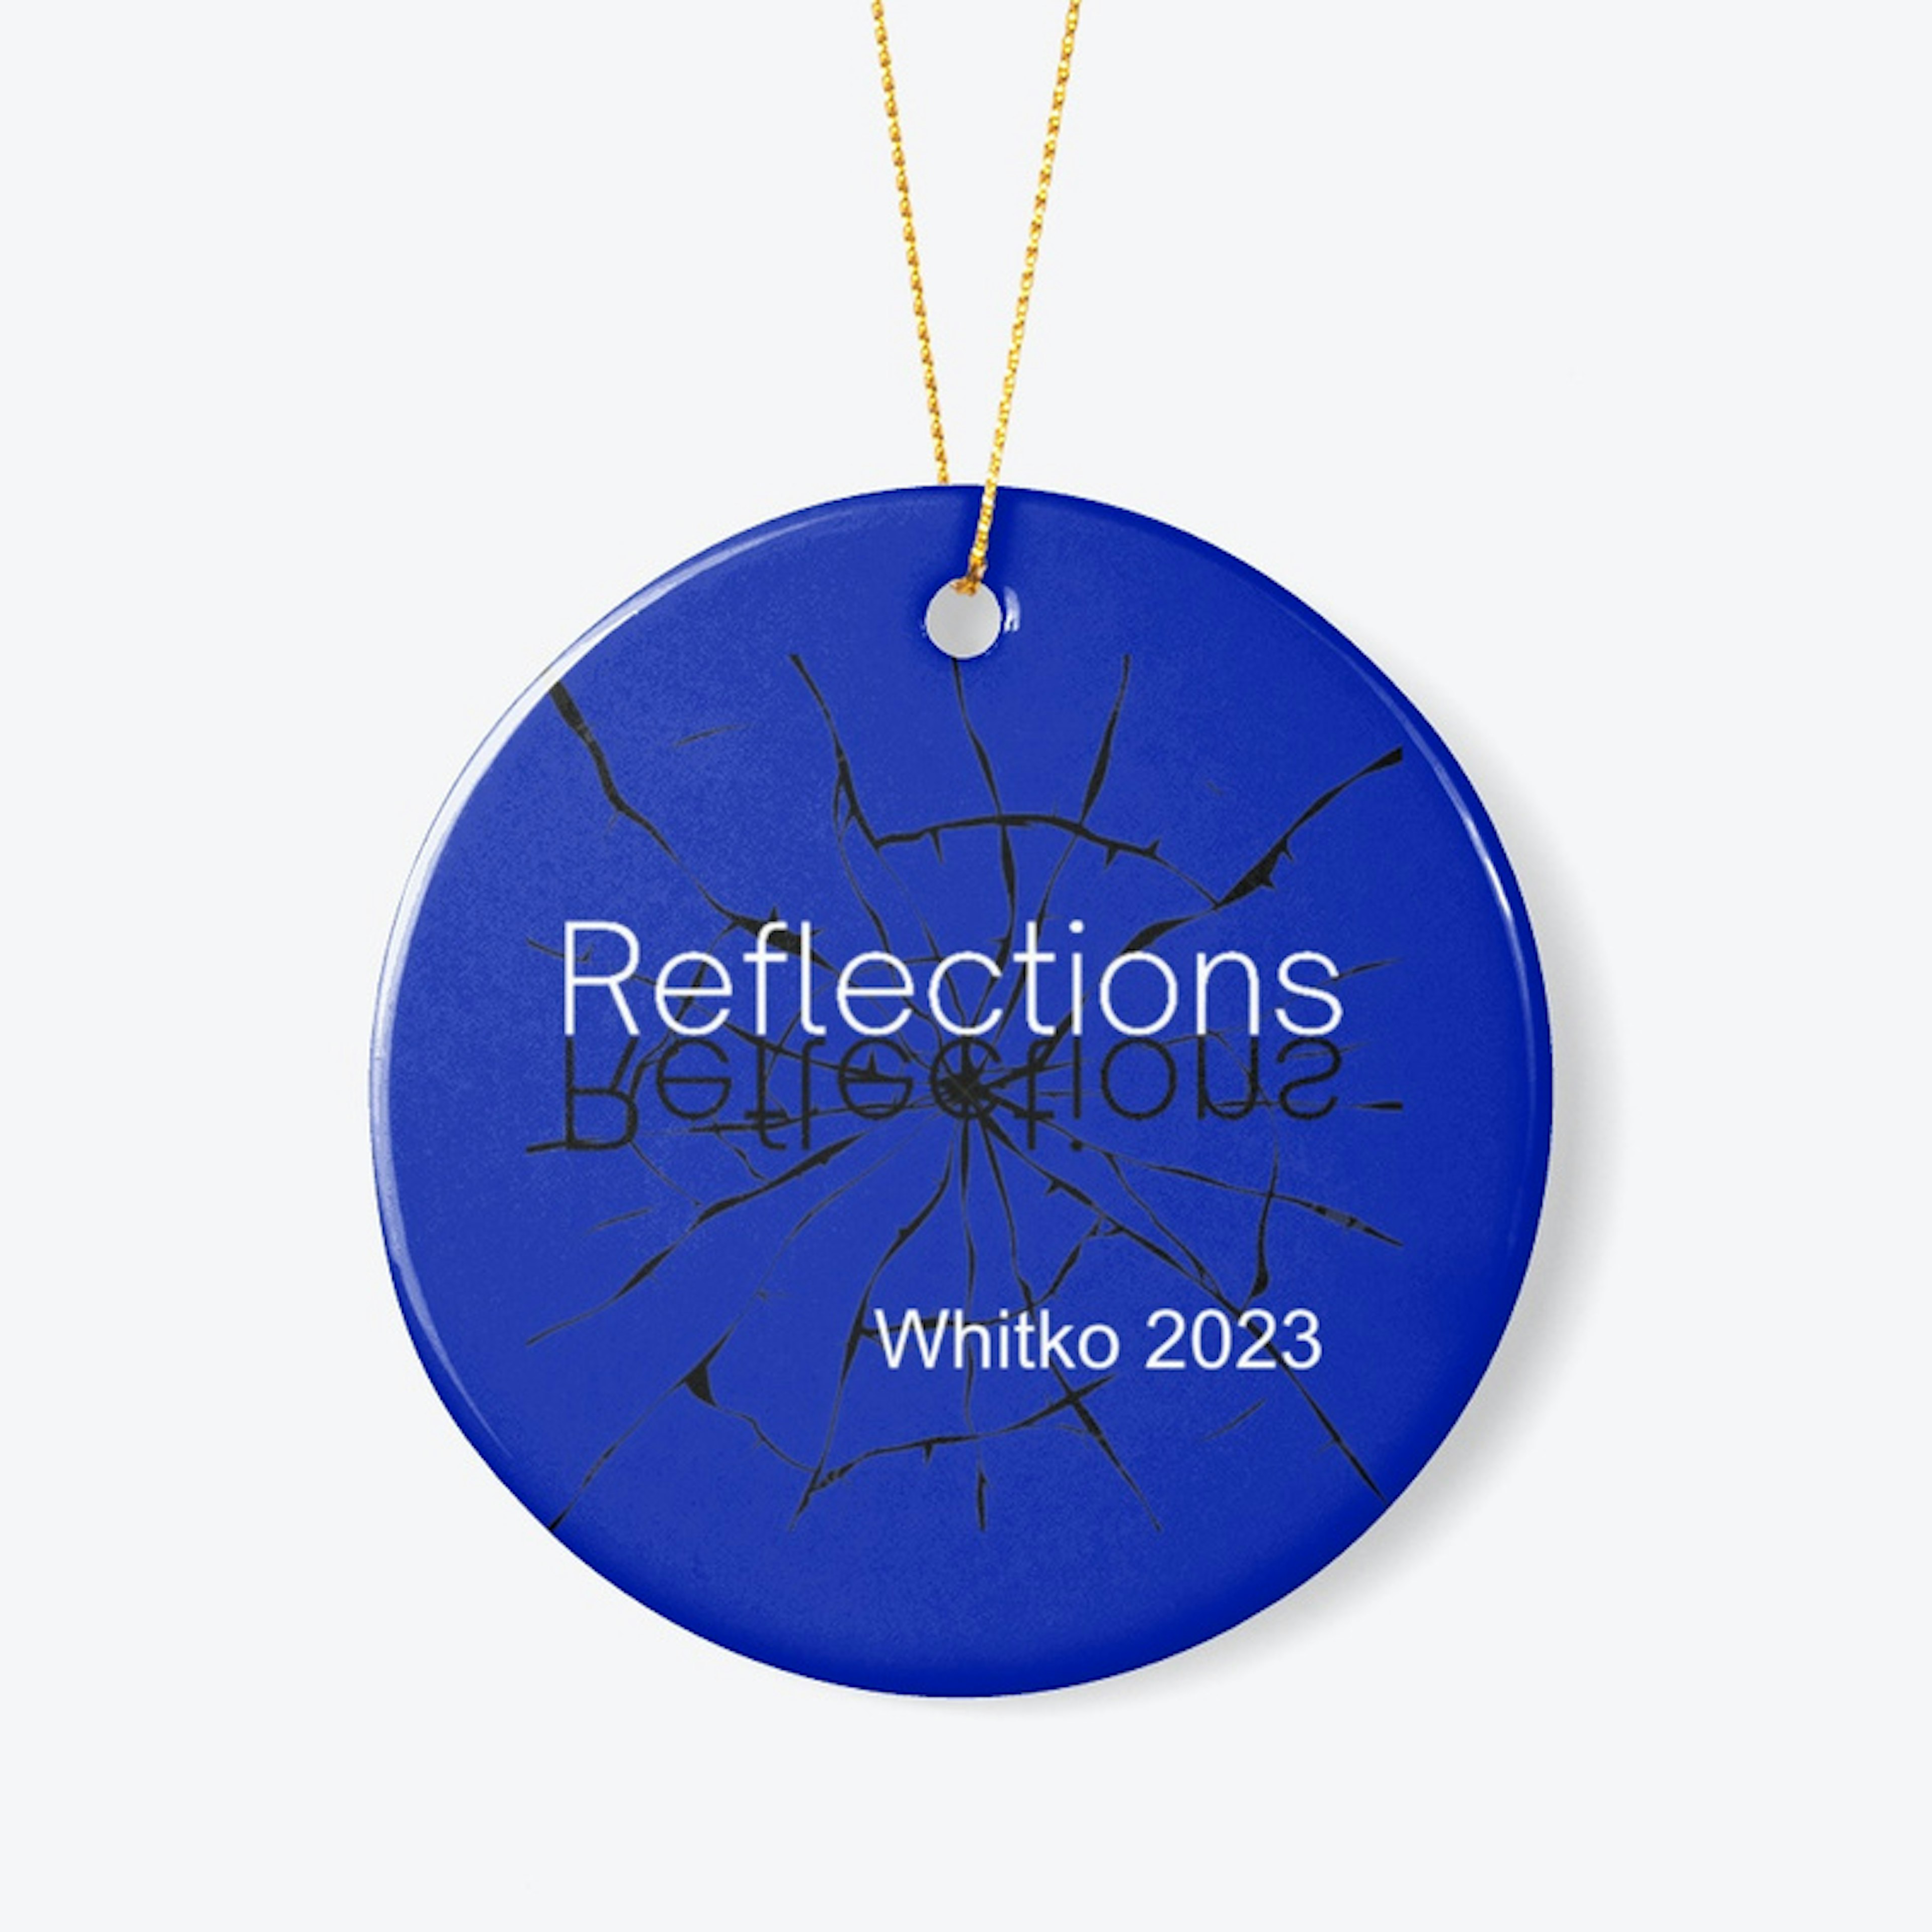 Reflections 2023 Ornament